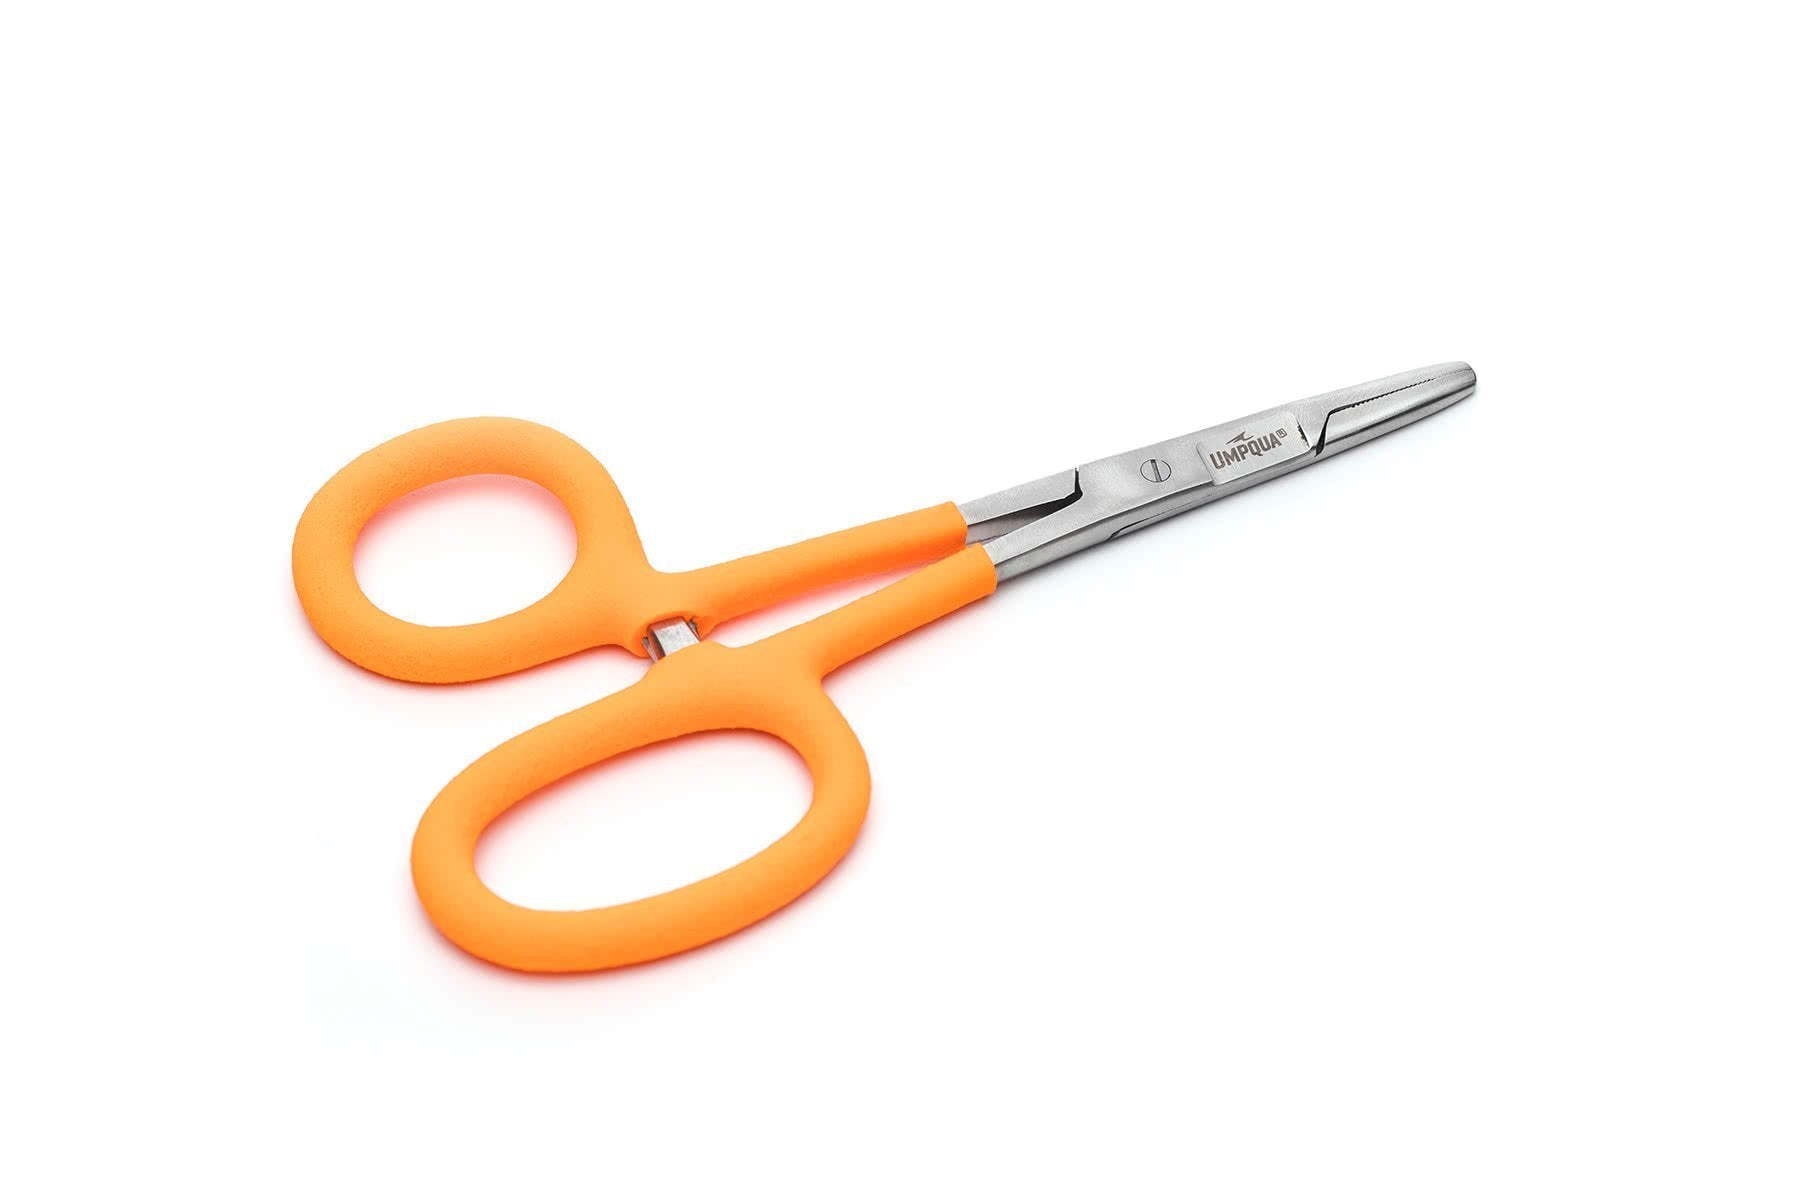 Precision Grip Forceps - Ascent Fly Fishing